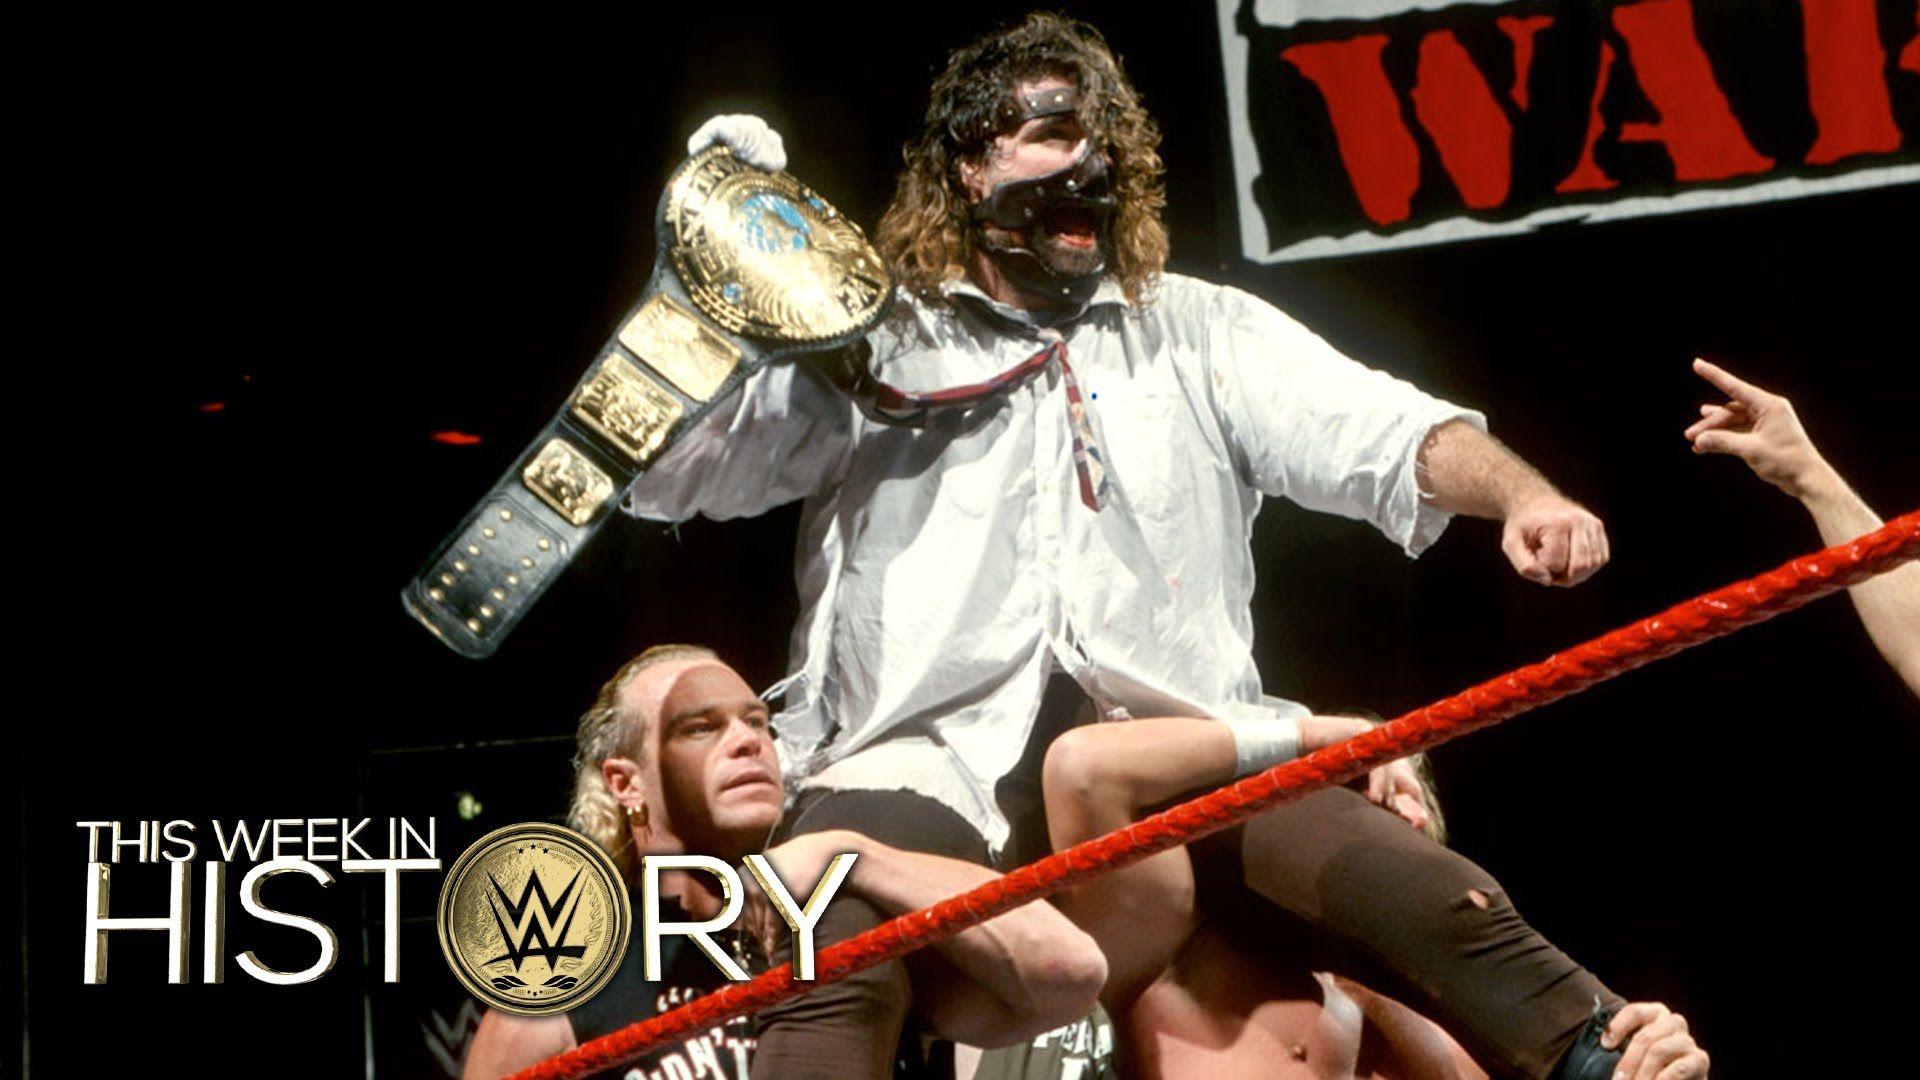 Mick Foley wins the WWE Championship on Raw: This Week in WWE